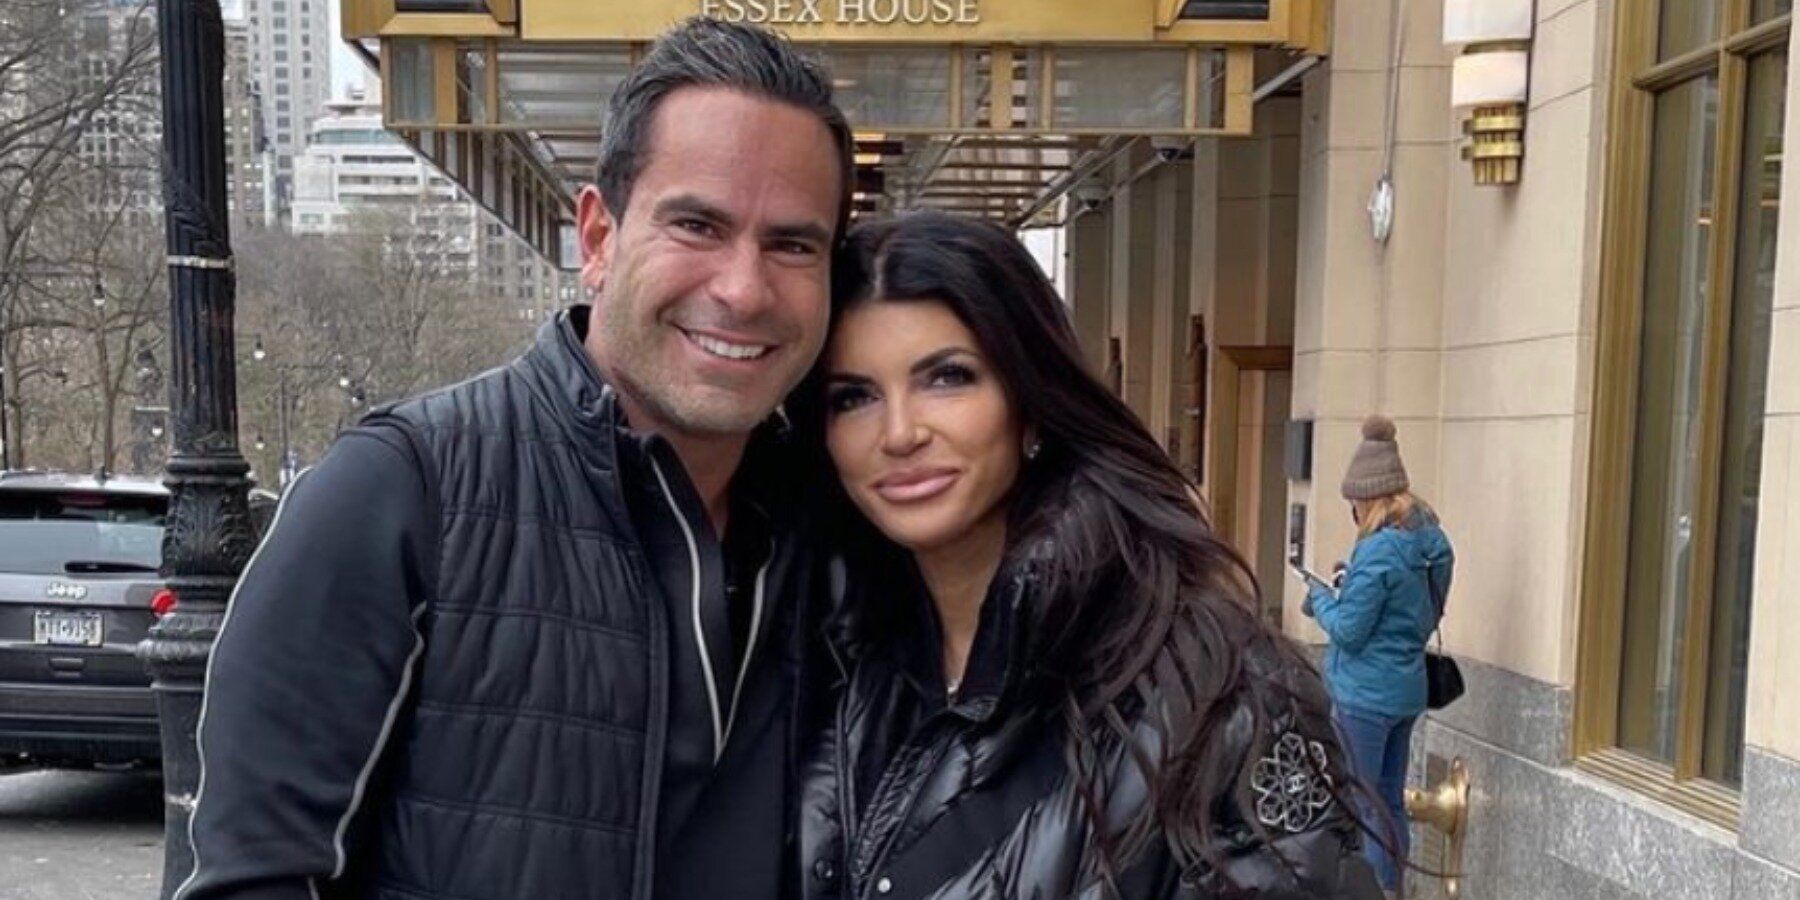 Teresa Giudice and Luis Ruelas on Real Housewives of New Jersey